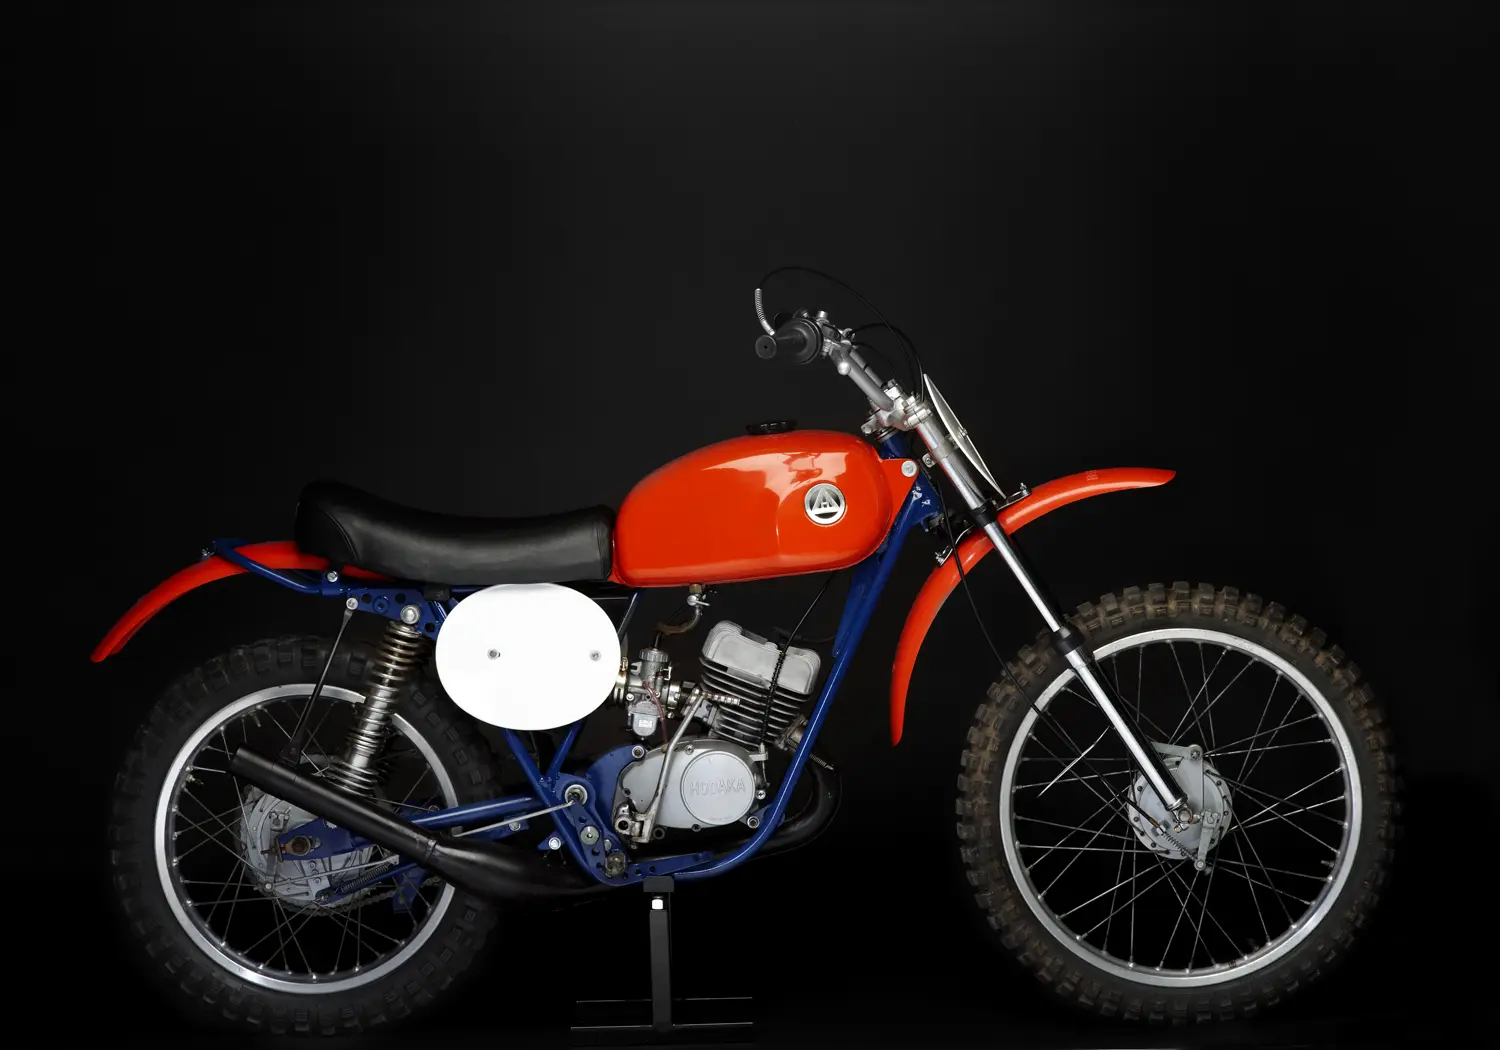 A red and blue dirt bike on a black background.